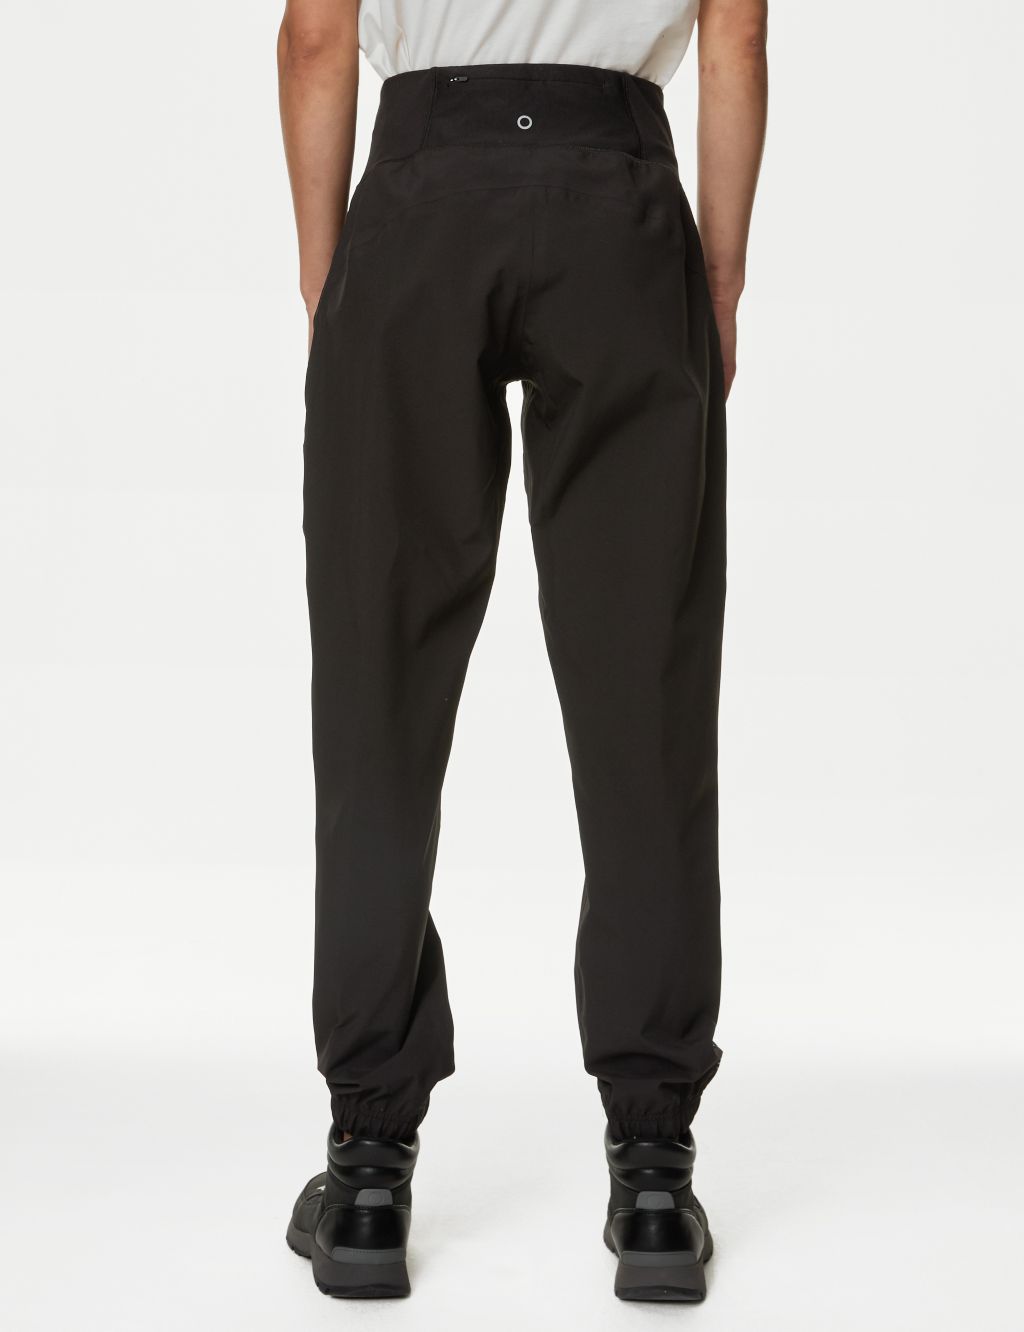 Waterproof Relaxed Walking Trousers | Goodmove | M&S